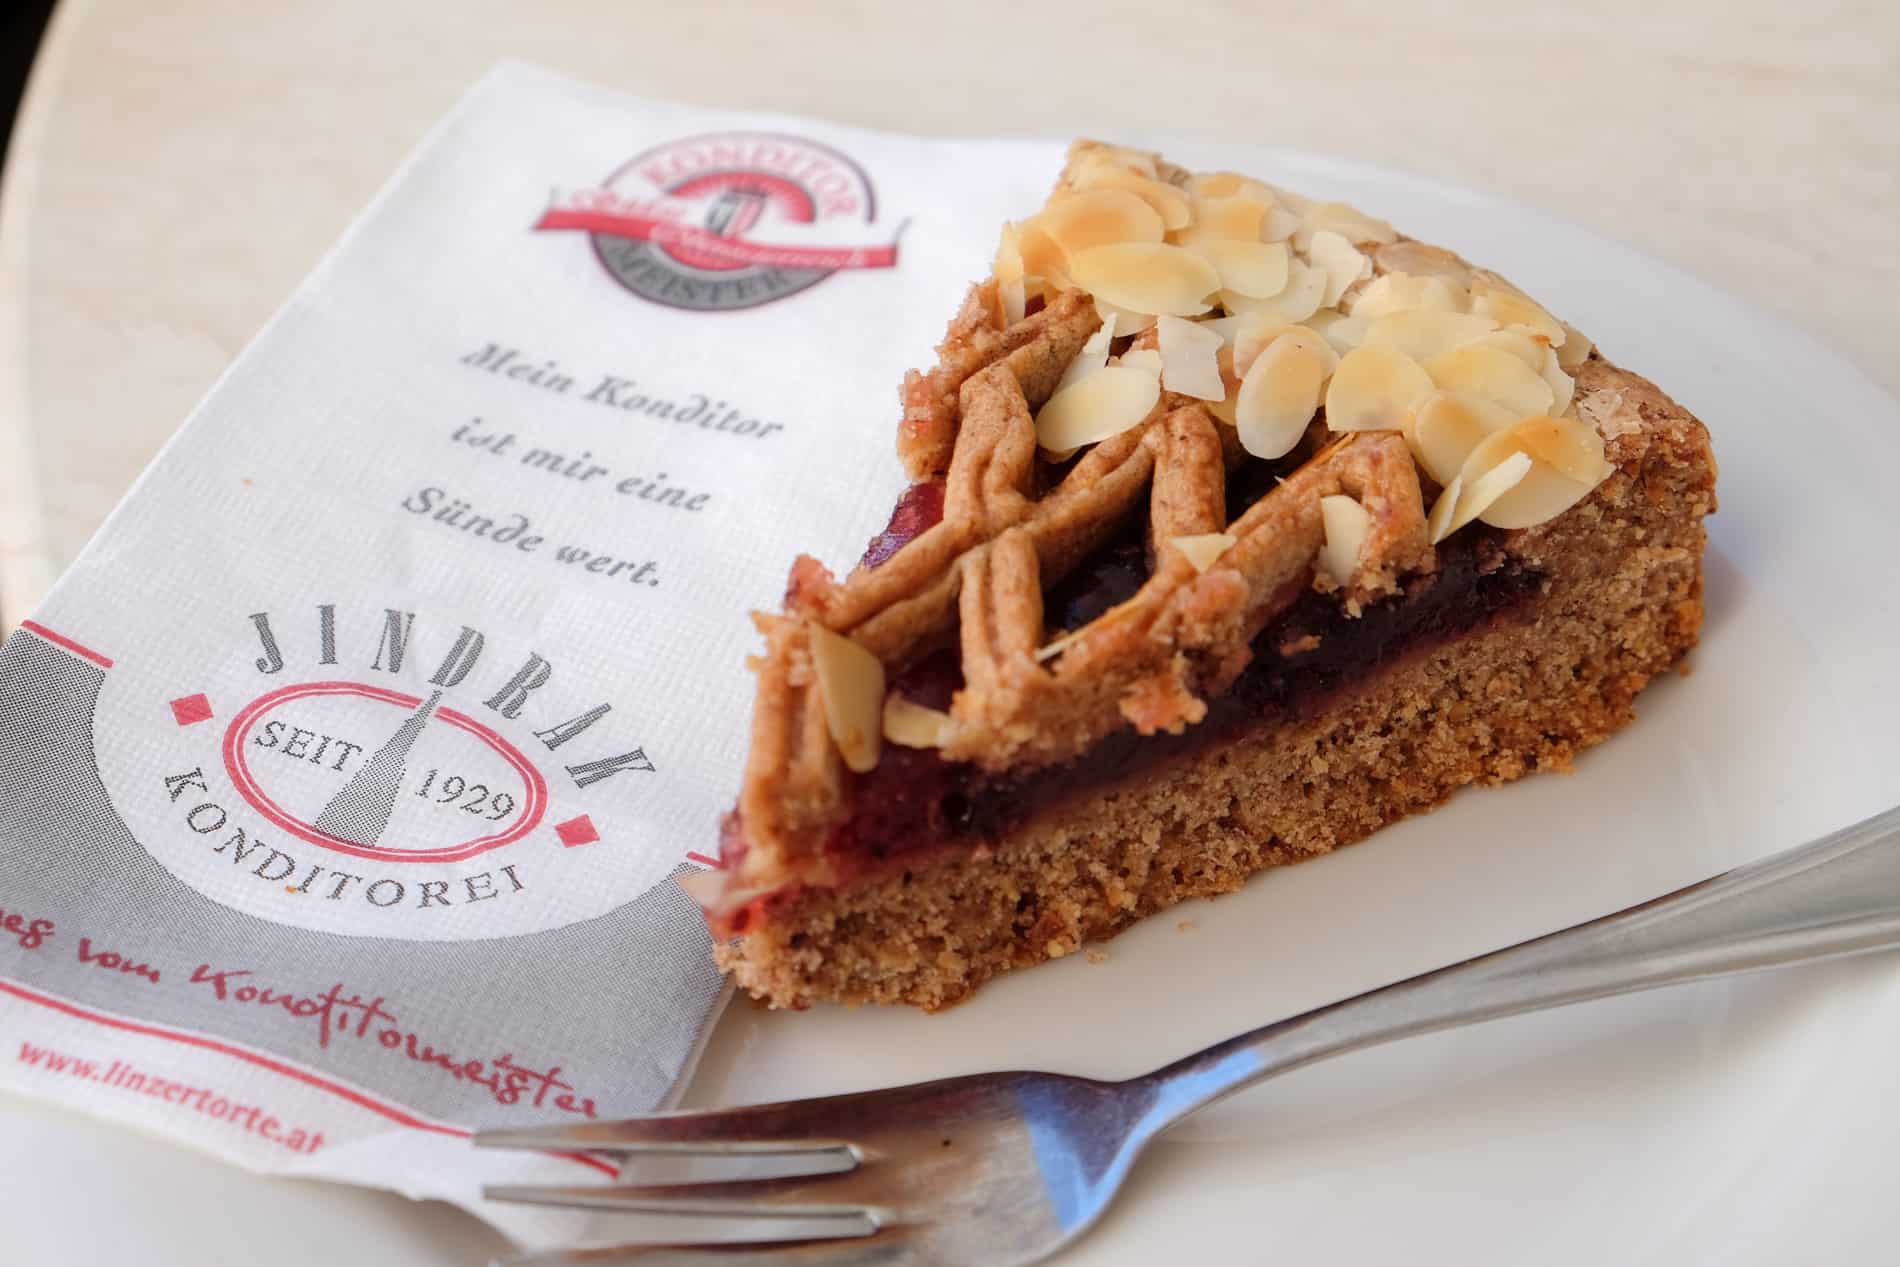 A slice of Linzer Torte with a criss-cross crust and jam filling, served in the Jindrak cafe in Linz since 1929. 